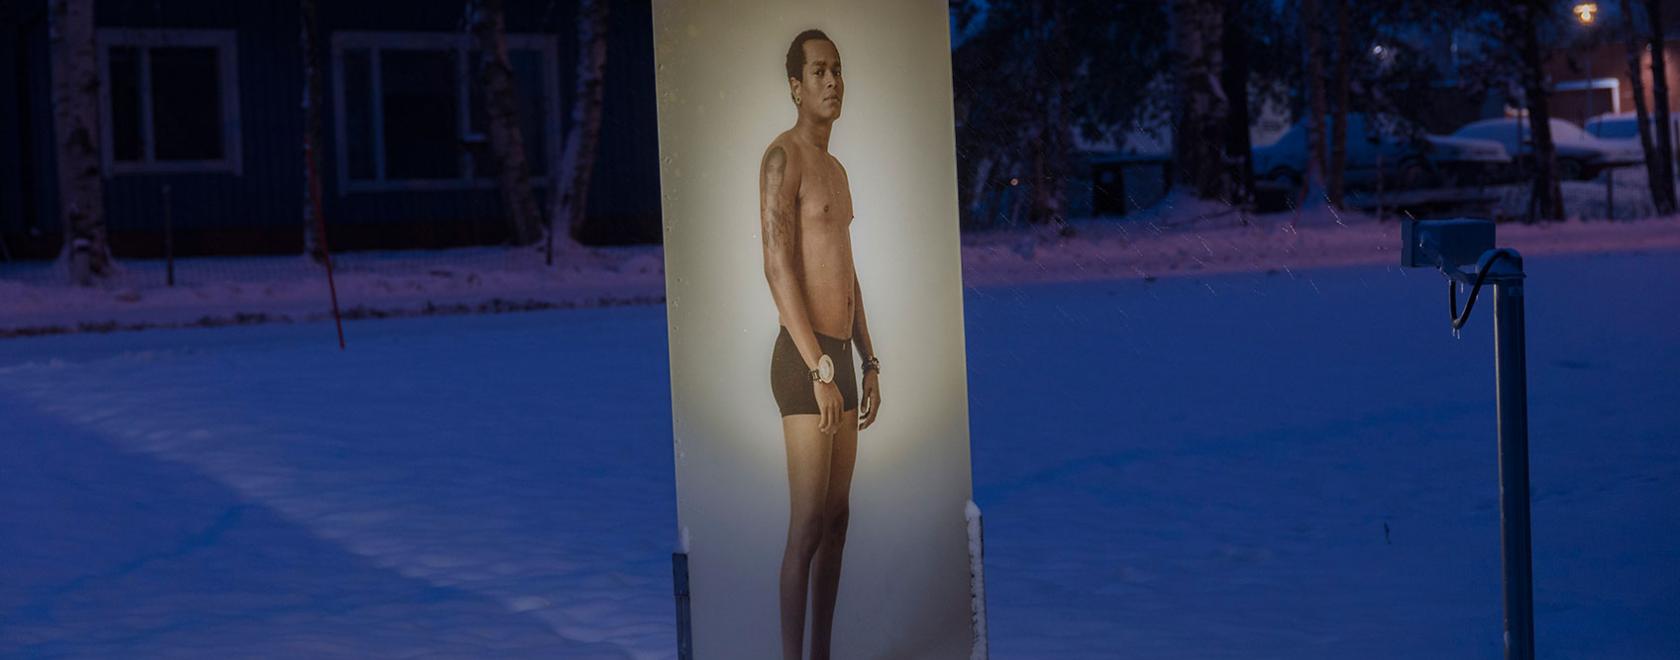 Aki Roukala: Contemporaries, Pudasjärvi. The work consists of eight life-size portraits on glass panels placed in different locations in the centre of the small municipality.